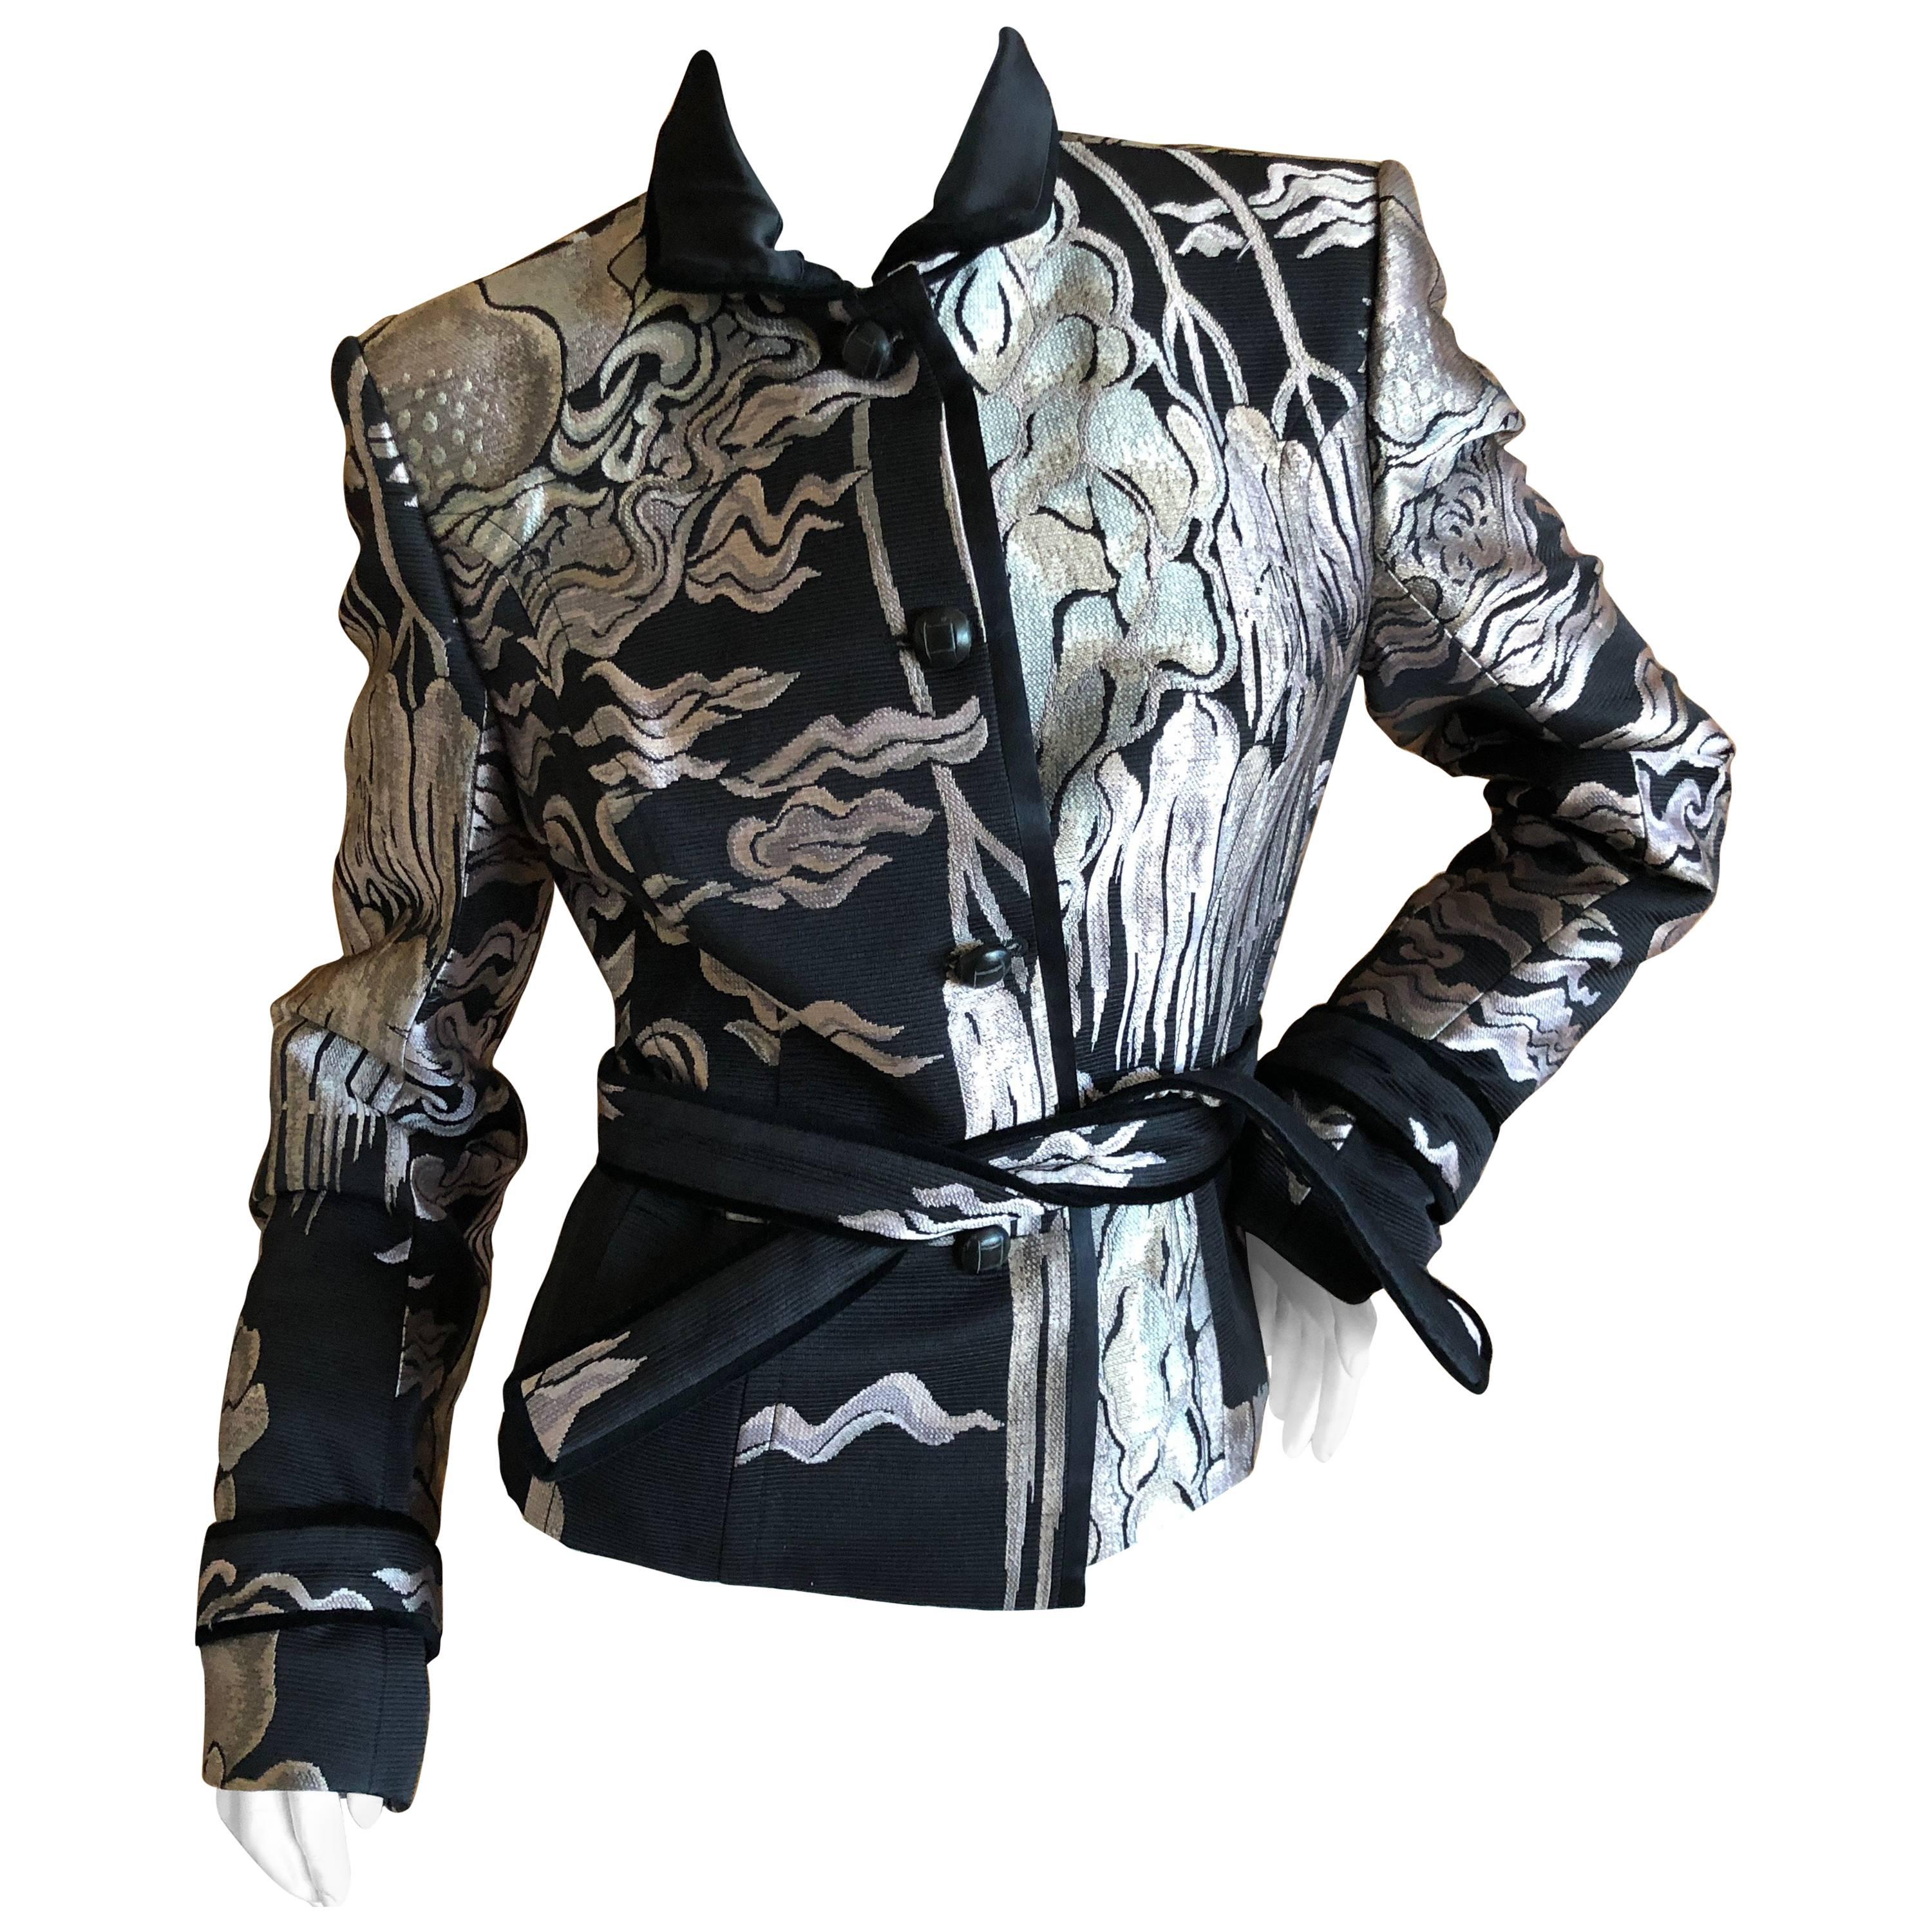 Yves Saint Laurent by Tom Ford Fall 2004 Chinoiserie Jacquard Jacket For Sale